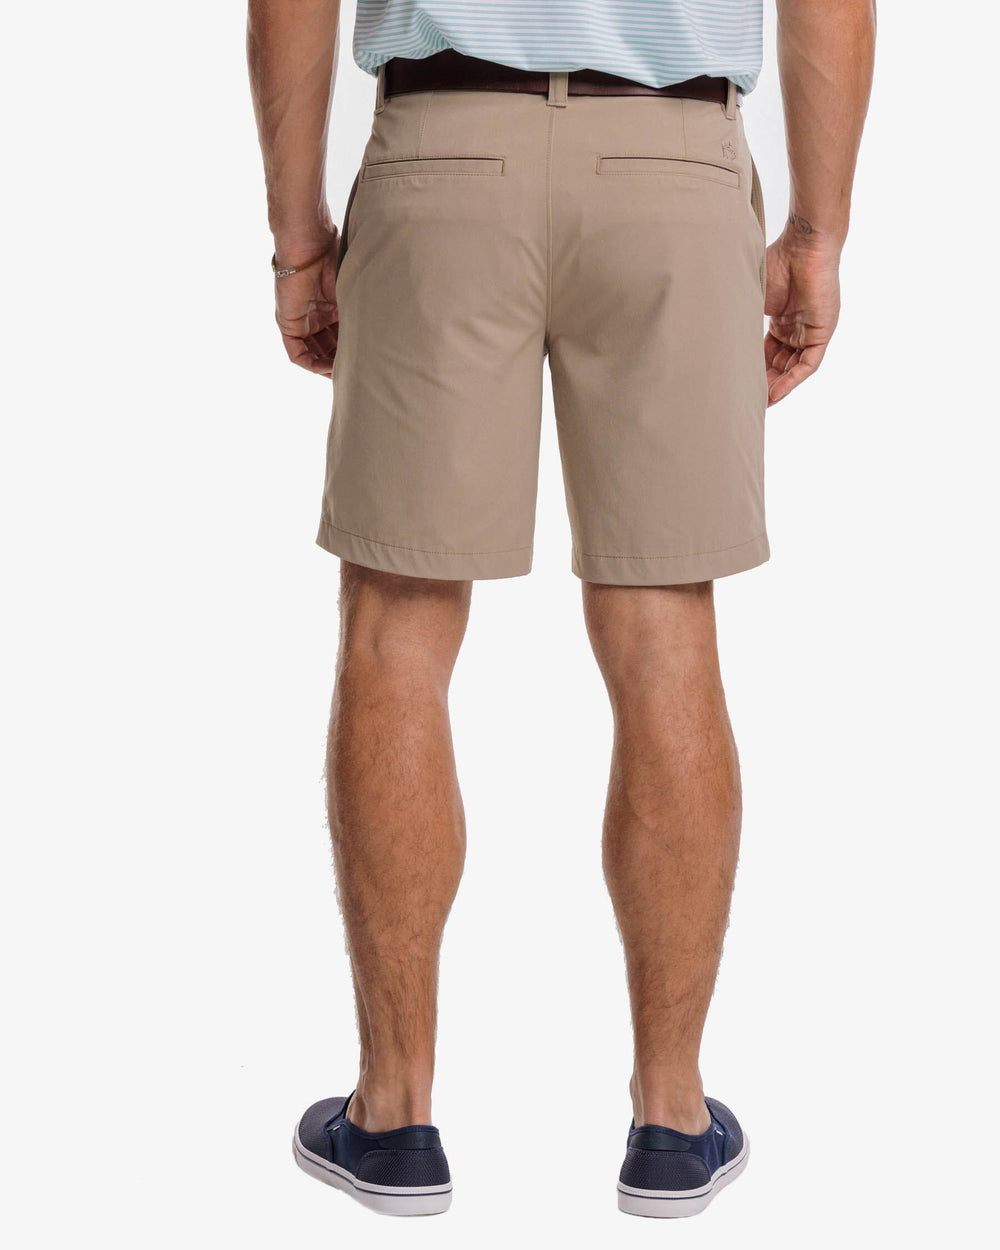 The back view of the Southern Tide brrr die performance short 1 by Southern Tide - Sandstone Khaki